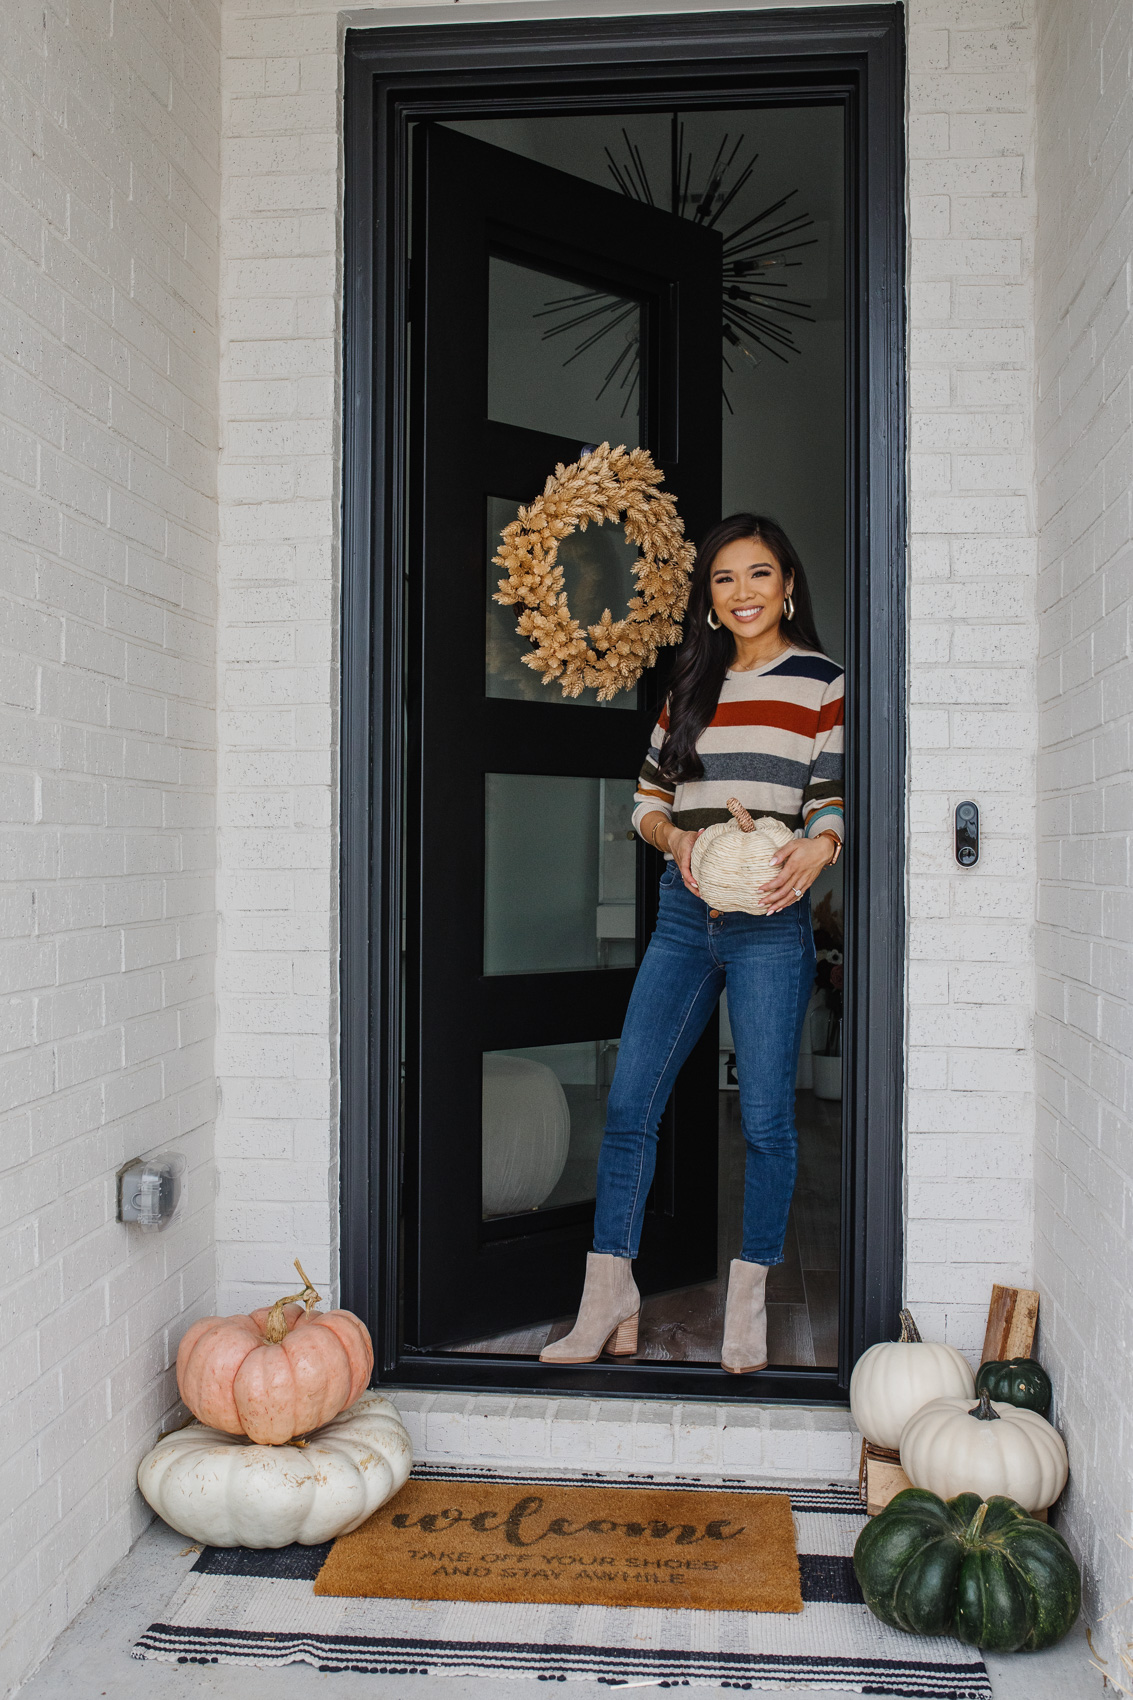 Blogger Hoang-Kim on her fall front porch with an iron door, neutral pumpkins, plaid rug, doormat, hops wreath wearing a cashmere striped sweater, blue jeans and gold earrings